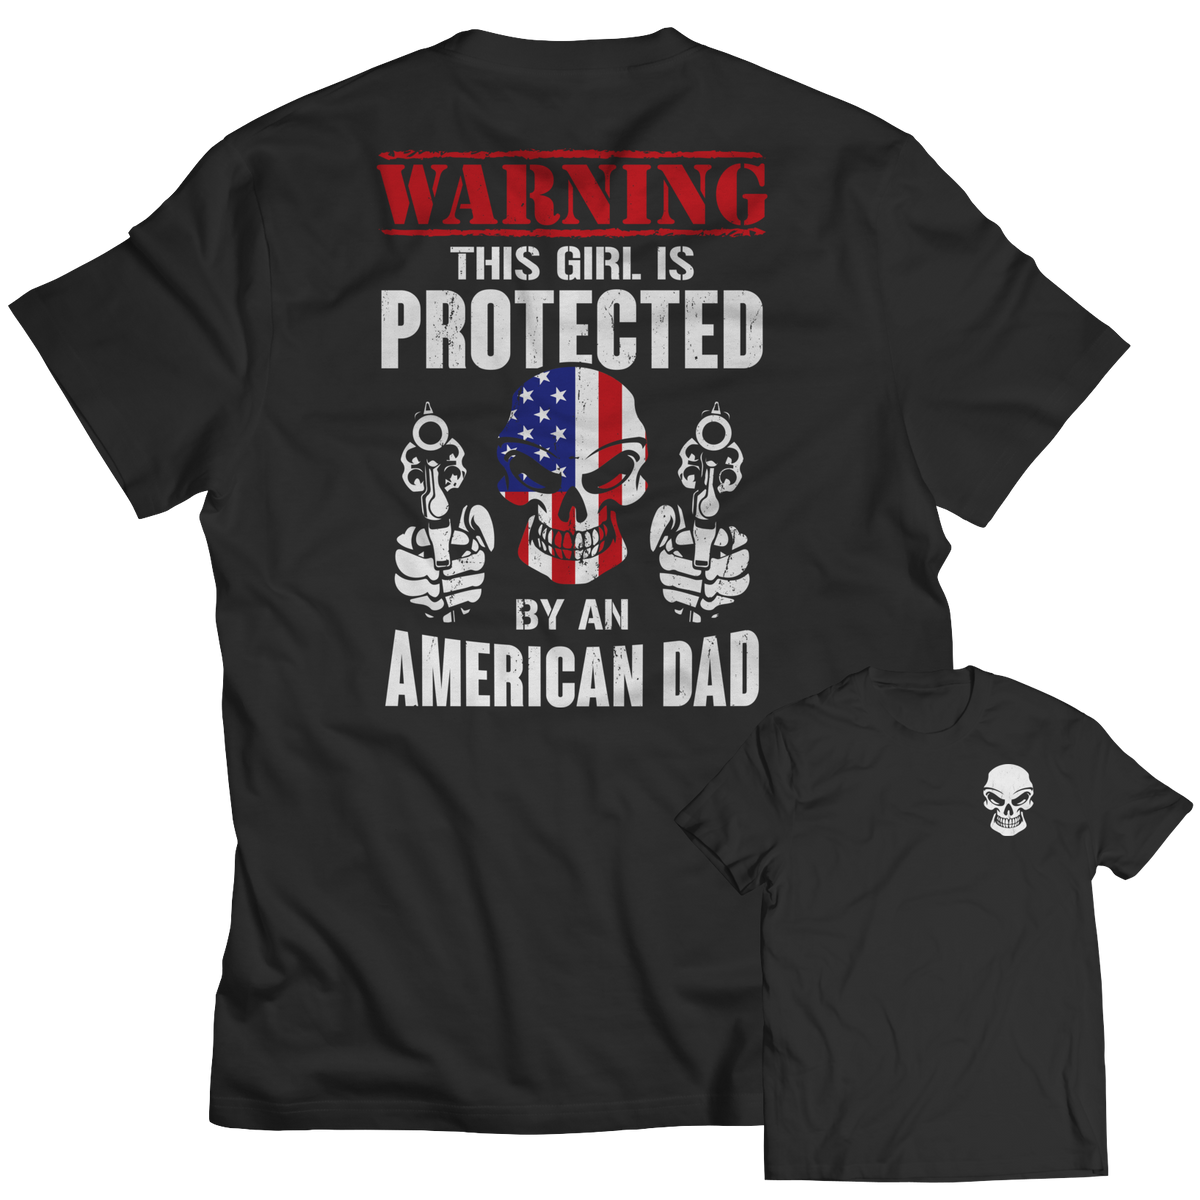 T-SHIRT LIMITED EDITION - WARNING THIS GIRL IS PROTECTED BY AN AMERICAN DAD